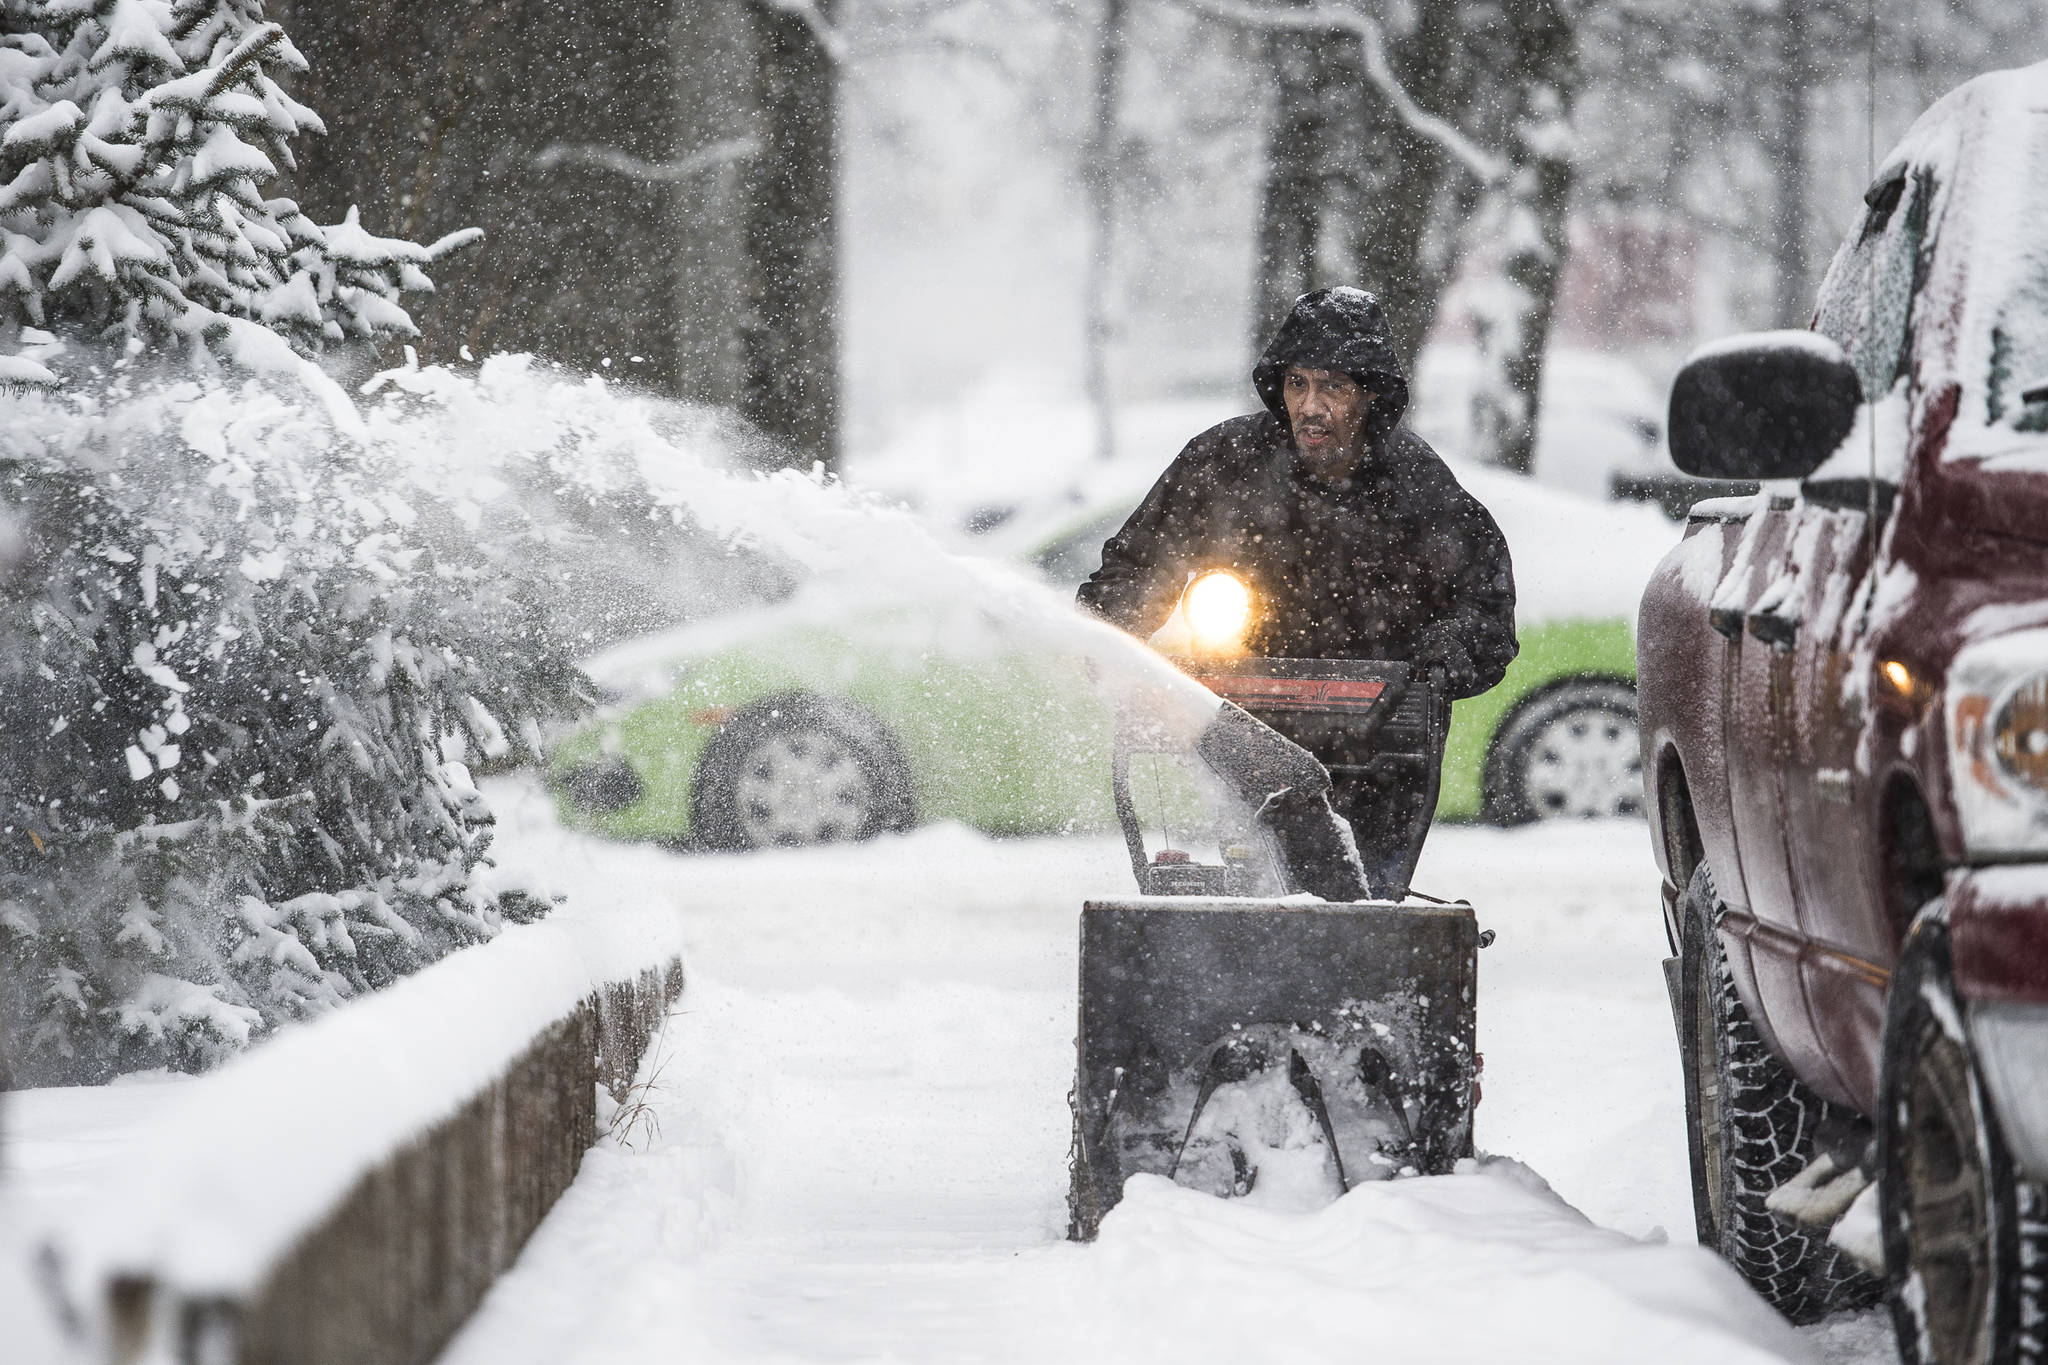 Gerald O’Halloran uses his snow blower to clear the sidewalk for his neighbors on 11th Street as snow builds up on Thursday, Jan. 10, 2019. (Michael Penn | Juneau Empire)